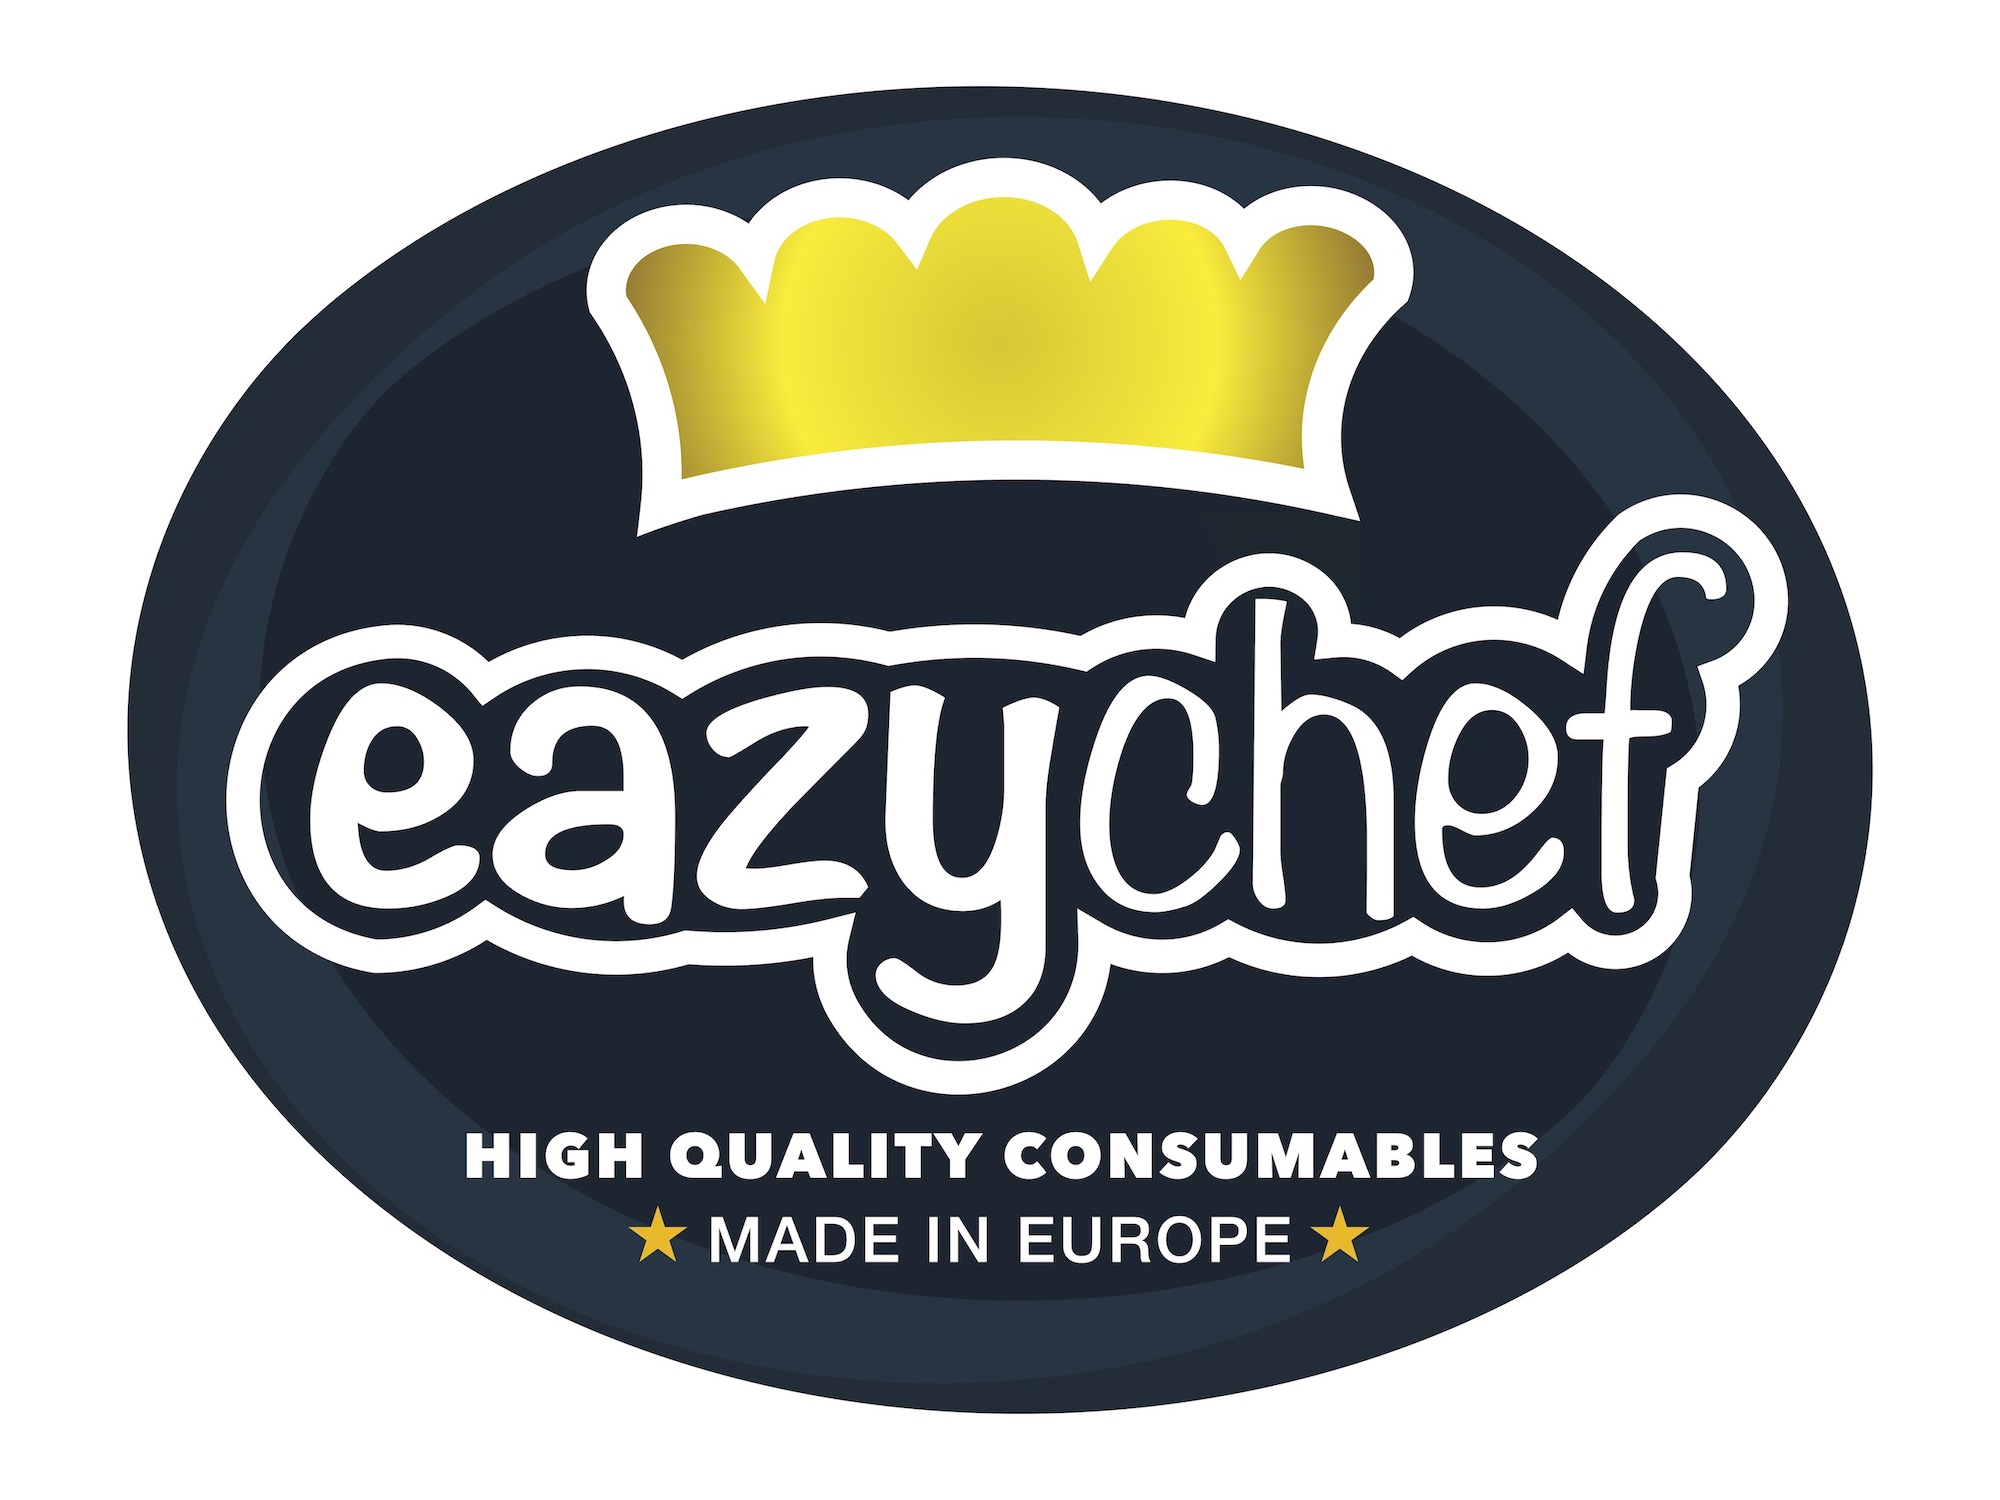 eazychef HIGH QUALITY CONSUMABLES MADE IN EUROPE